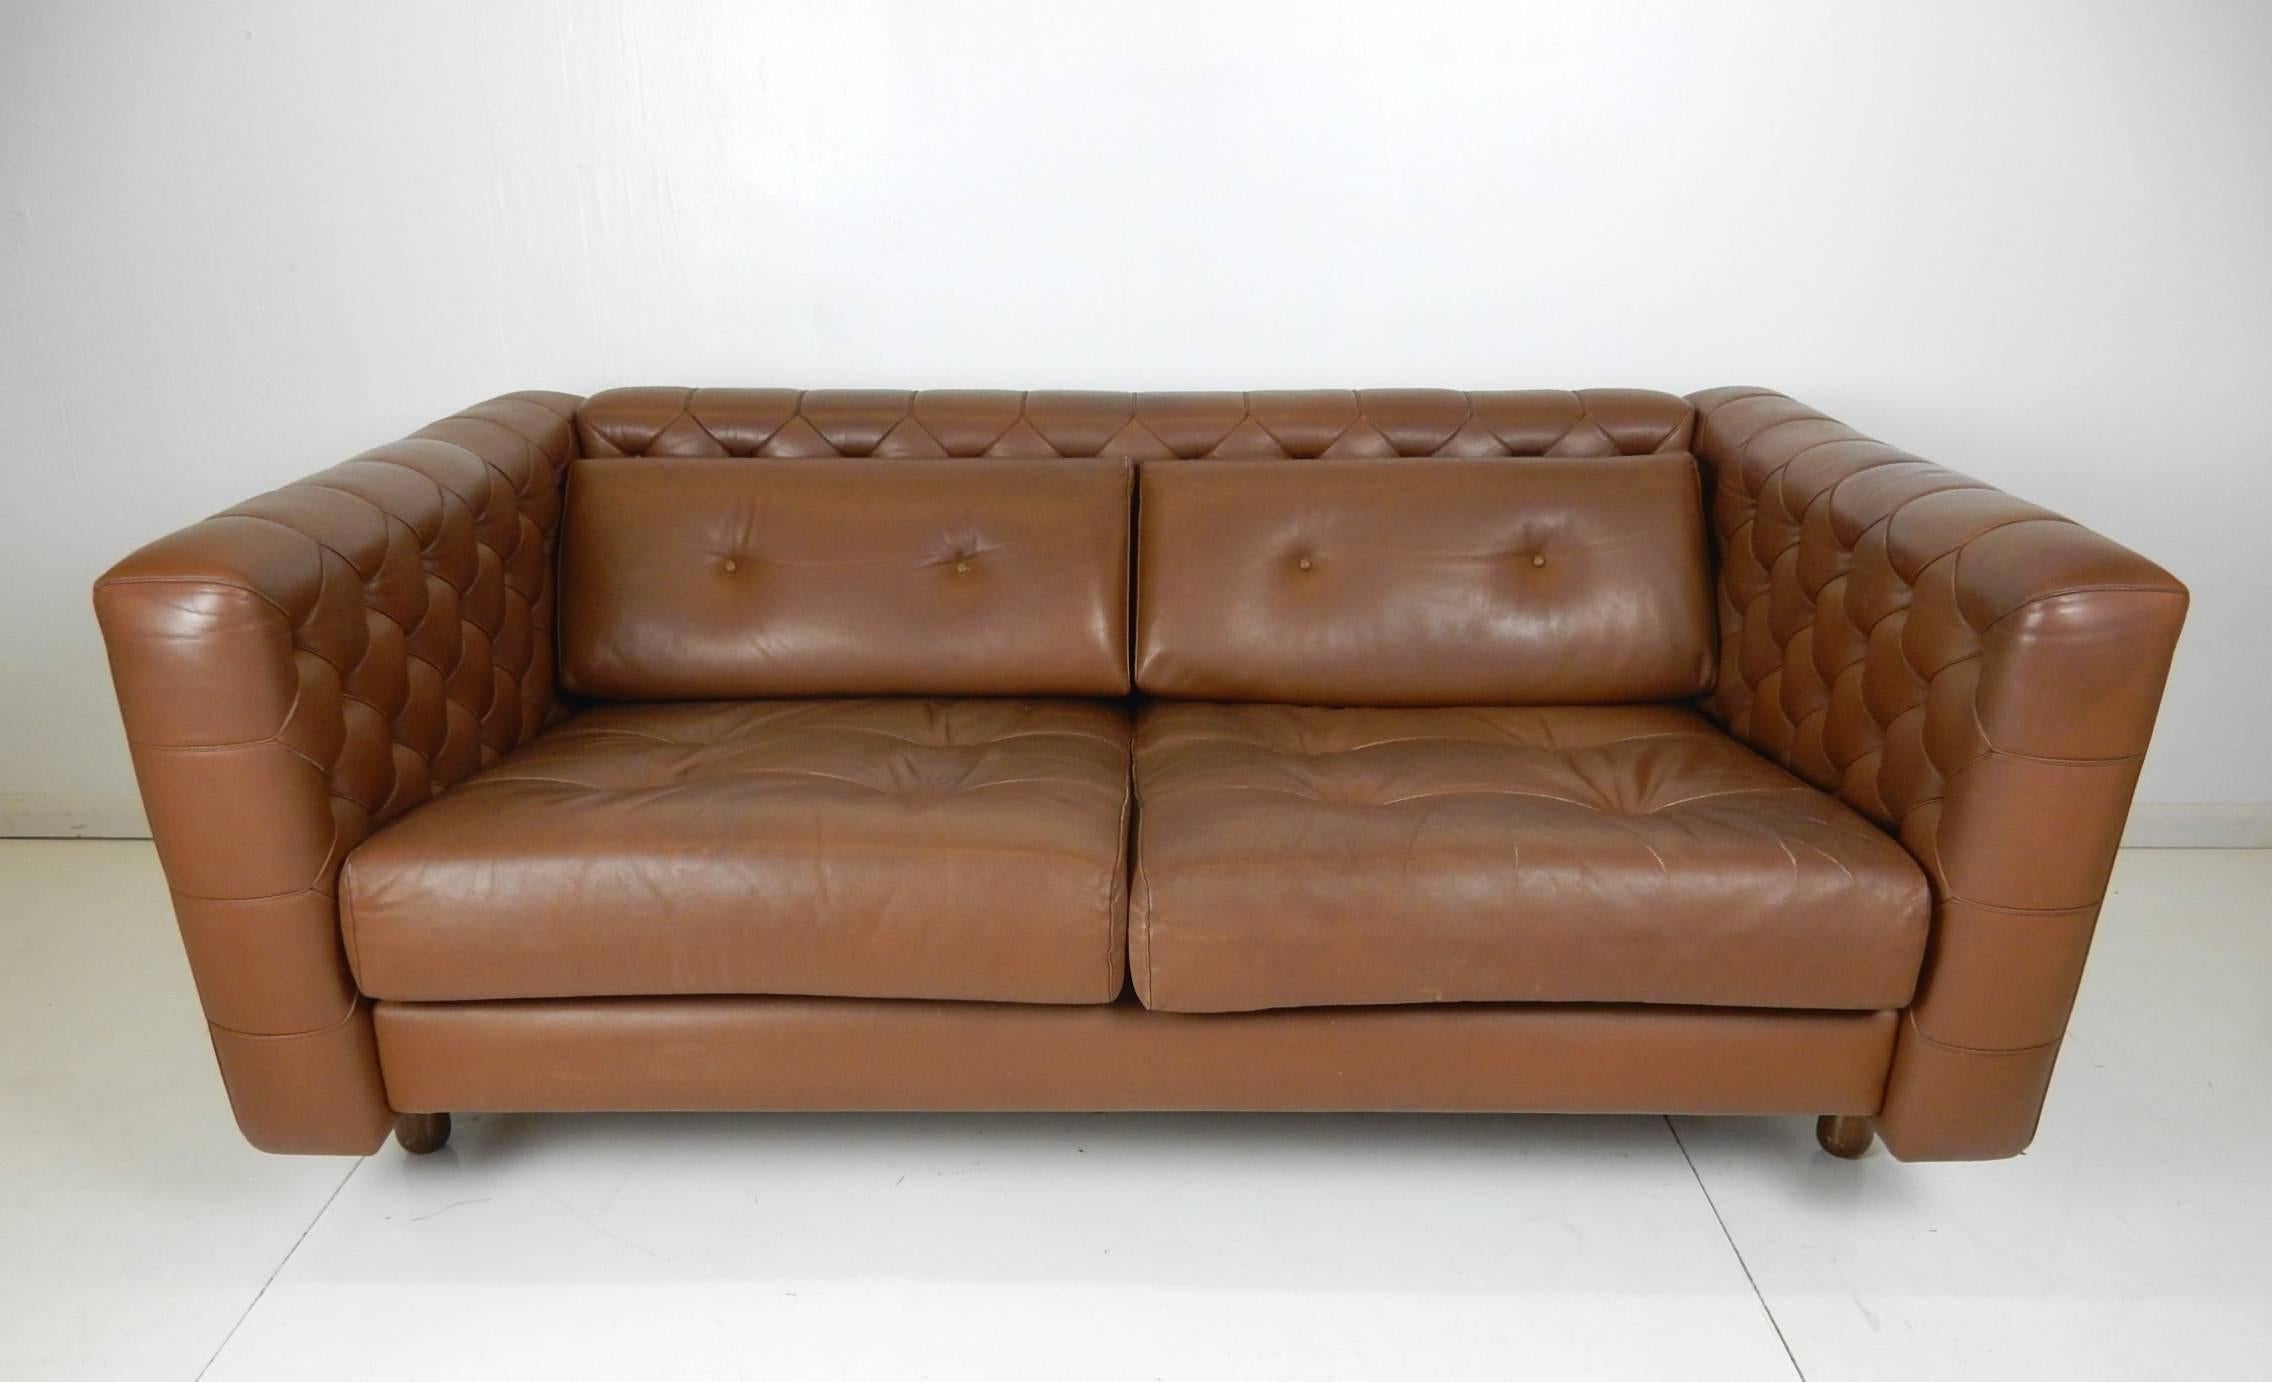 Very rare Gianfranco Frattini design for Cassina settee sofa in a luscious milk chocolate brown leather.
It is in very good condition with soft foam and leather throughout.
Solid sofa and all original.
   